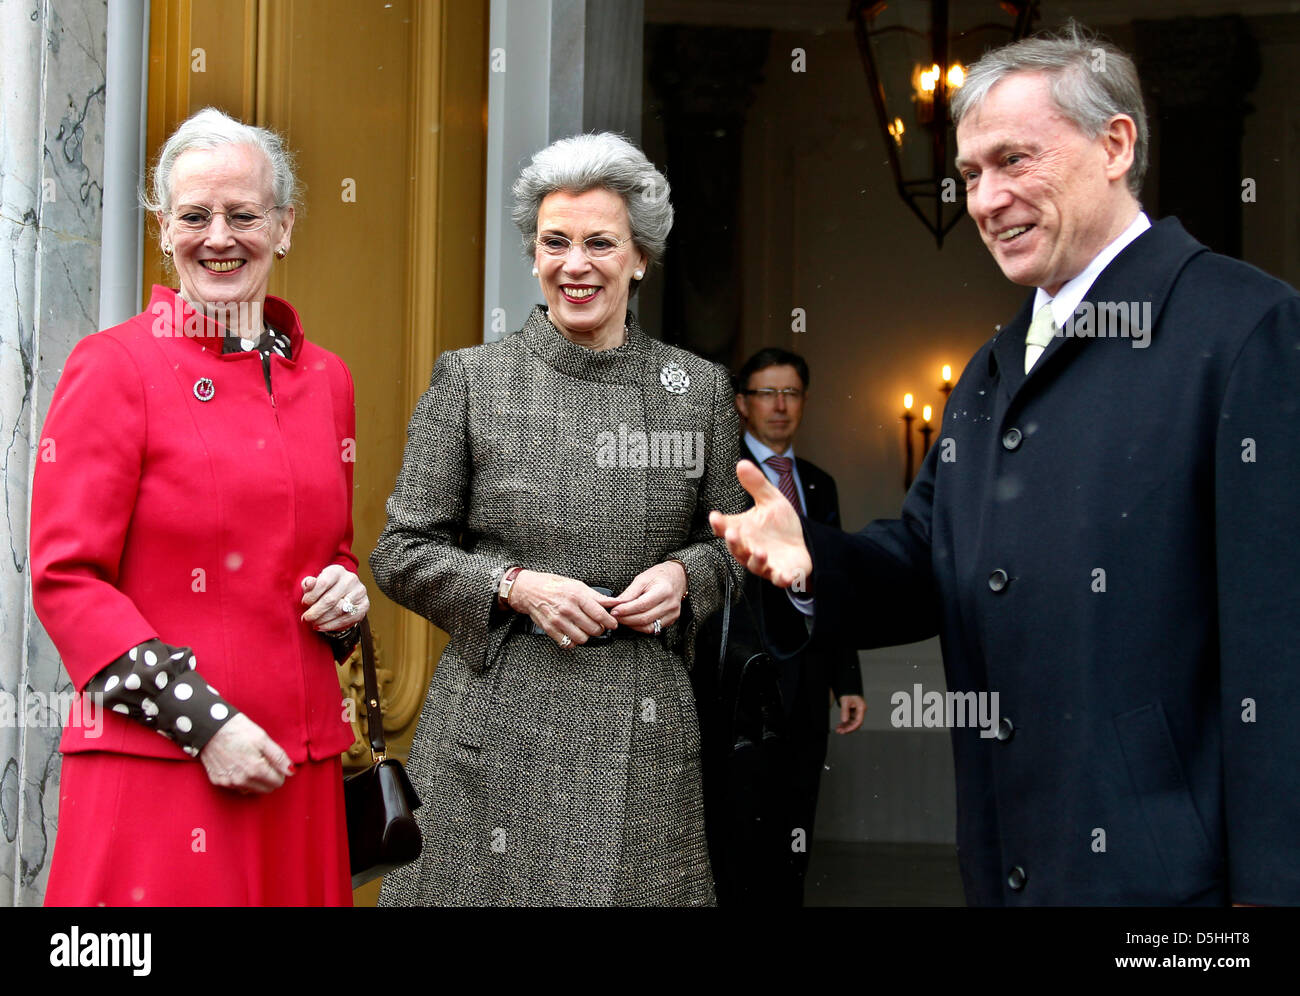 danish-queen-margrethe-ii-l-and-her-sister-princess-benedikte-welcome-D5HHT8.jpg